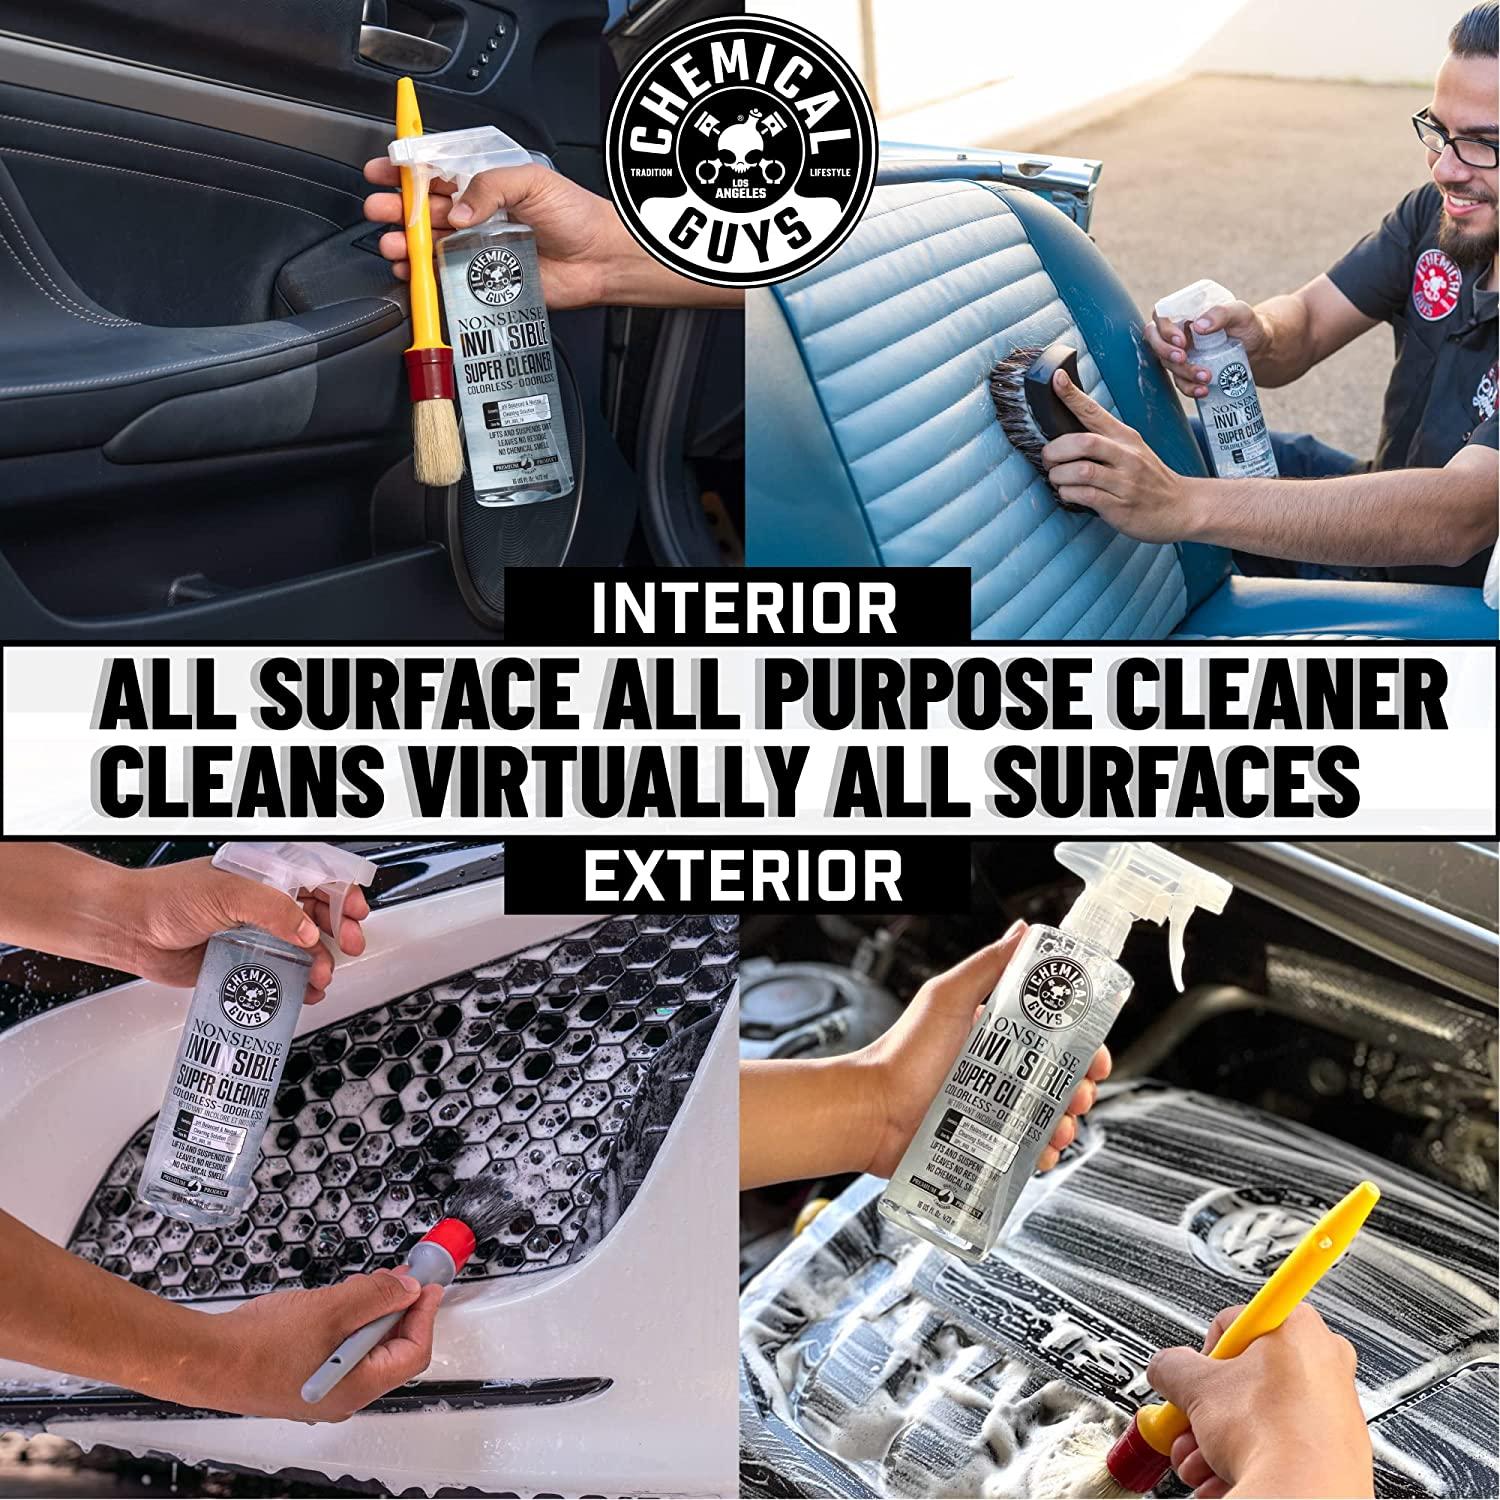 Chemical Guys - Is your steering wheel in need of some much needed cleaning?  Clean it up with Nonsense!⁣ ⁣ Nonsense All Purpose Cleaner is the colorless  and odorless cleaner that virtually